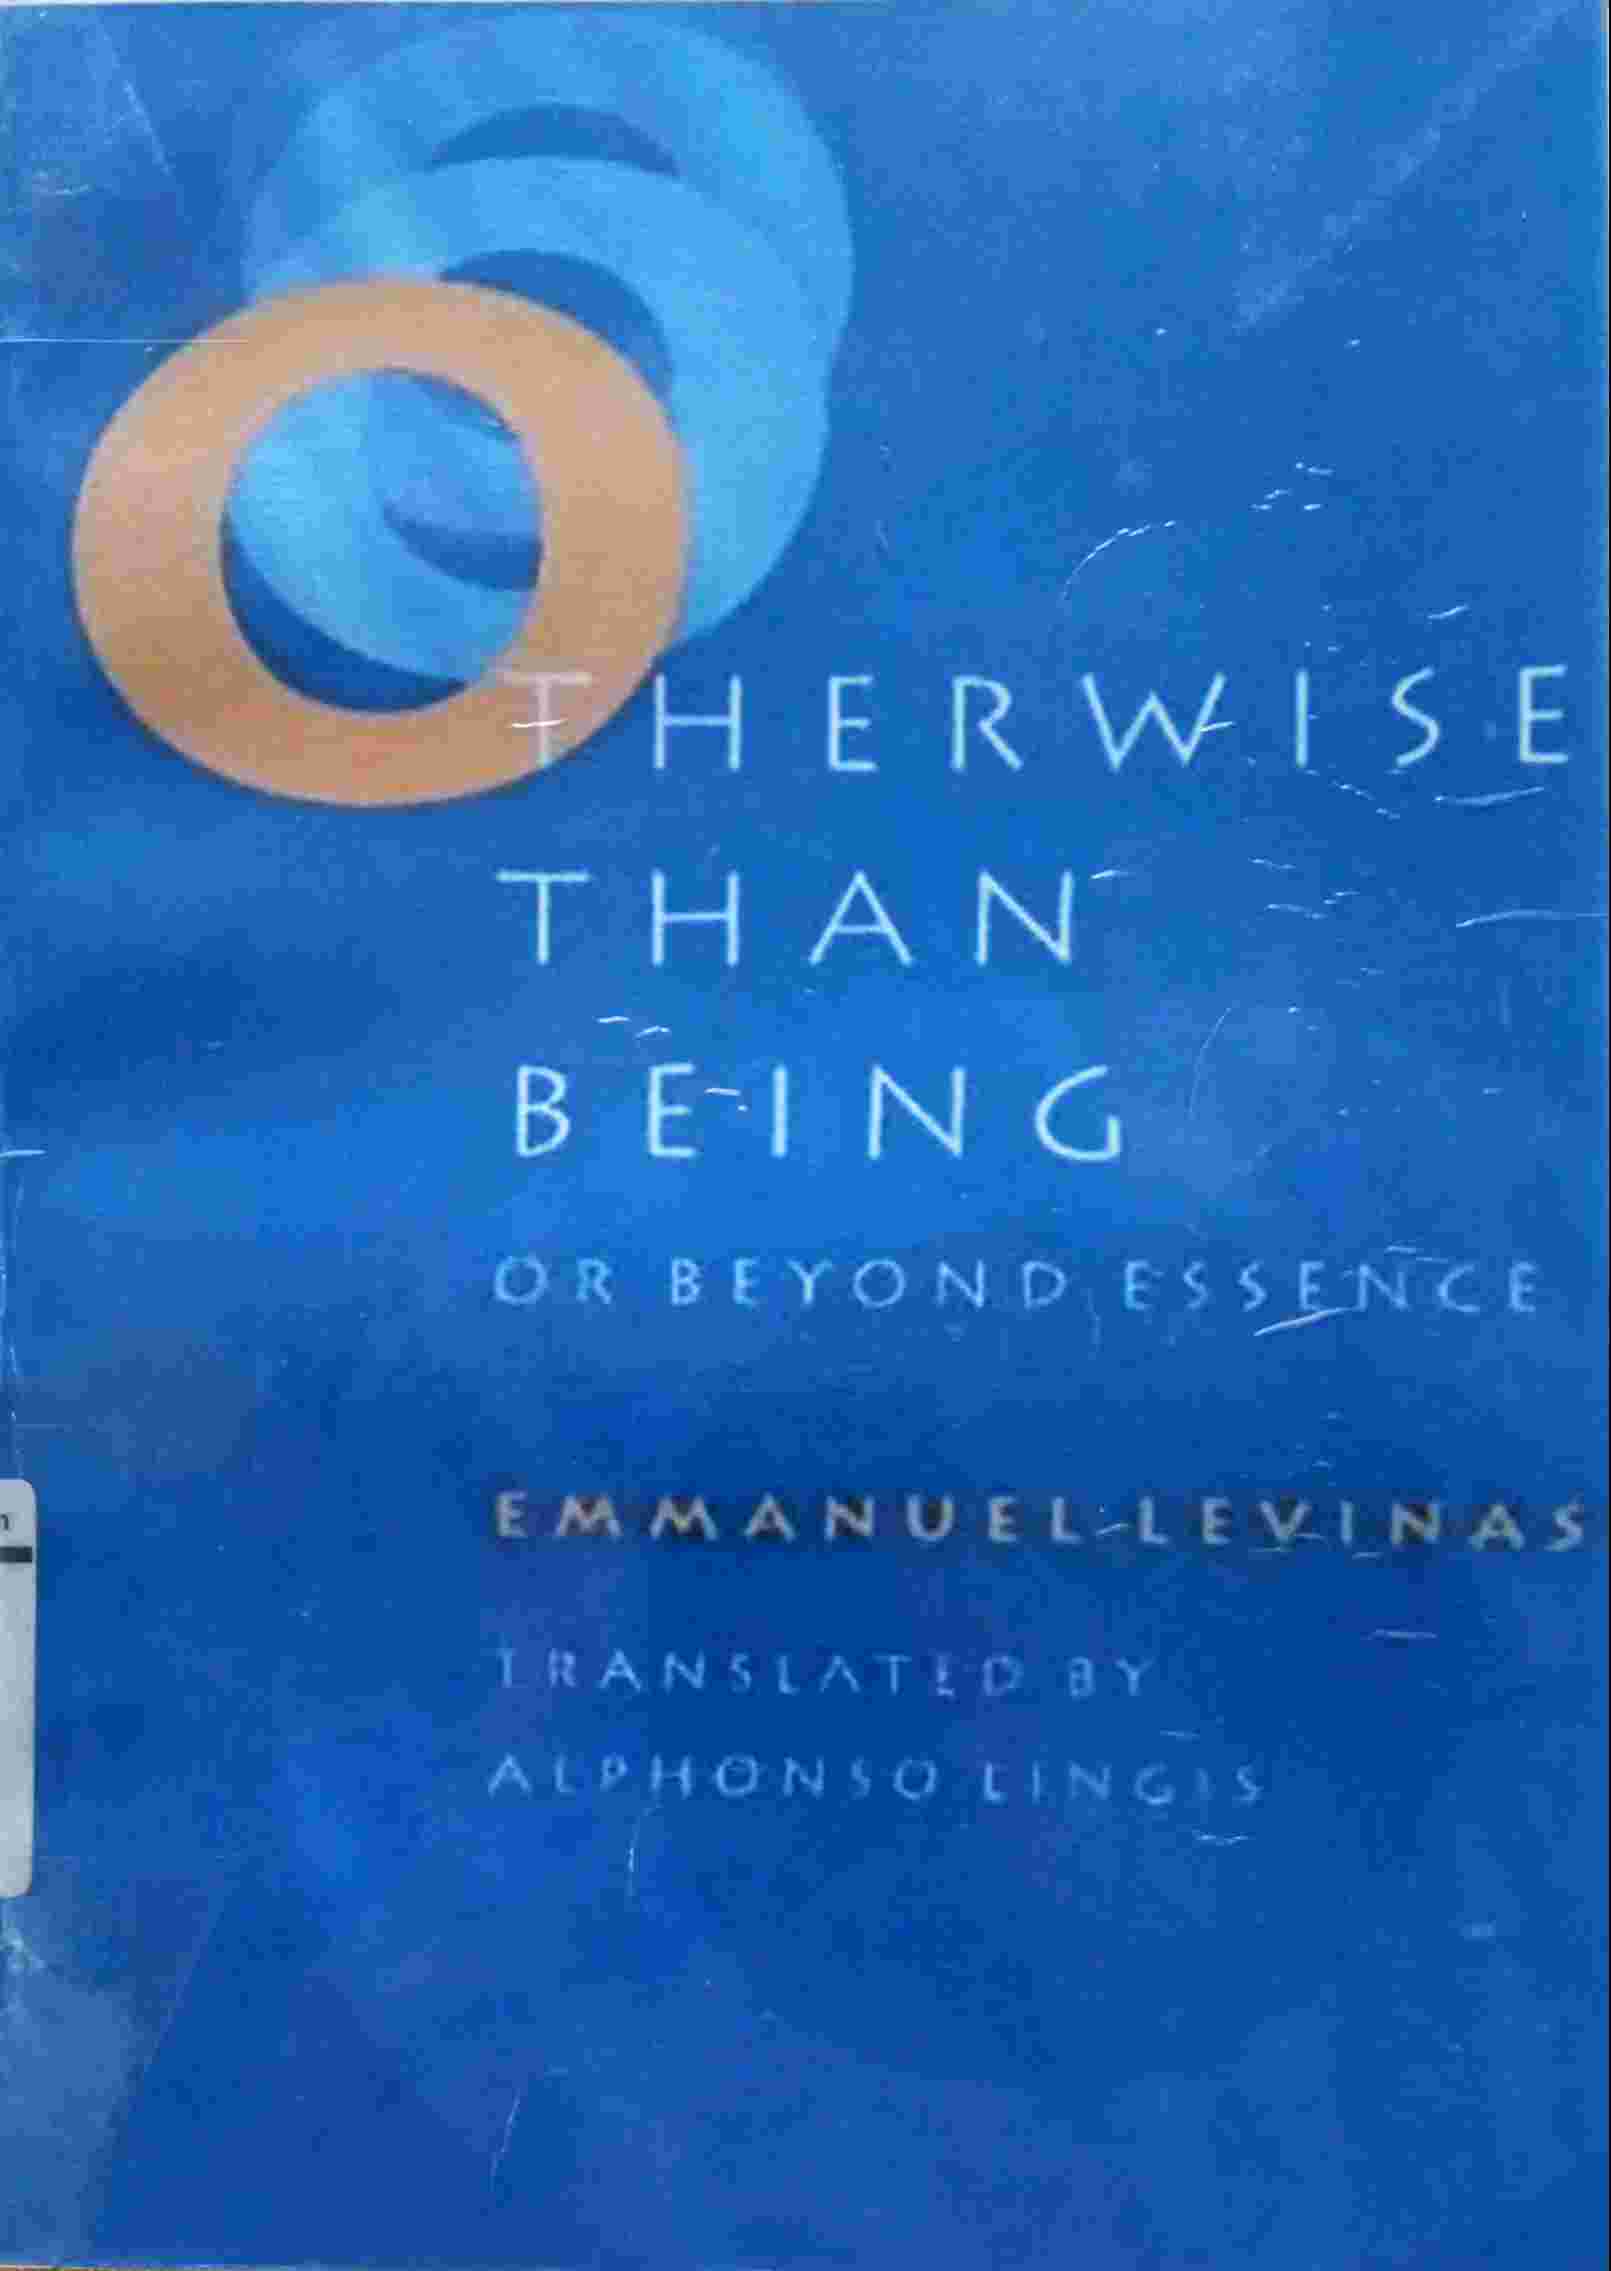 OTHERWISE THAN BEING OR BEYOND ESSENCE